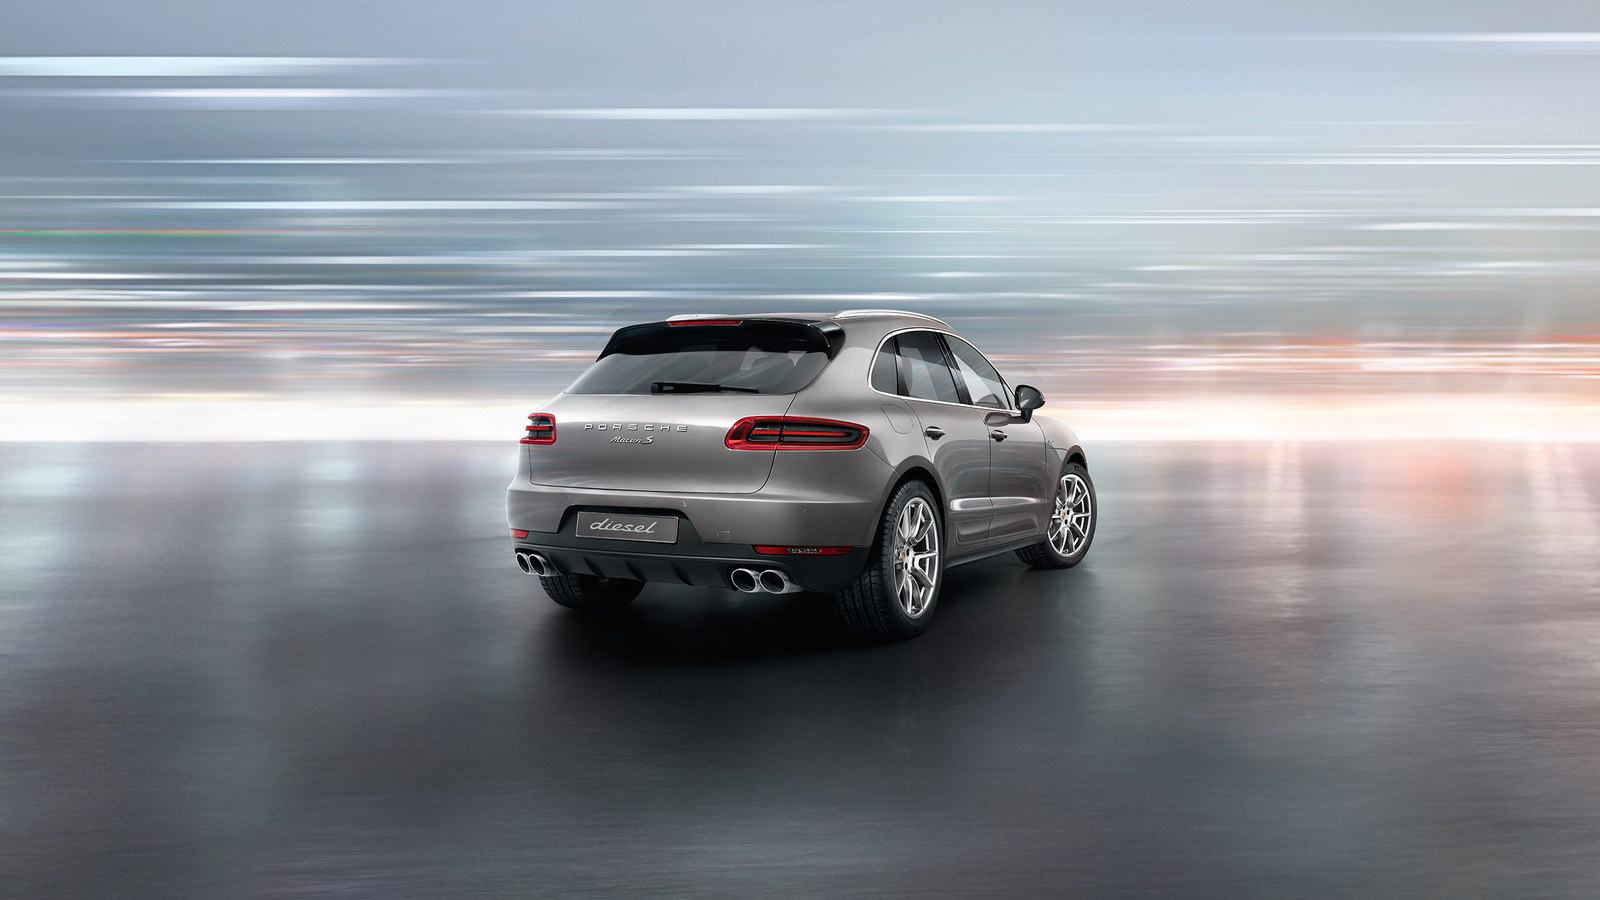 Porsche Macan S Diesel Hits 100 Km/H In 6.3S In Real World Tests - Autoevolution